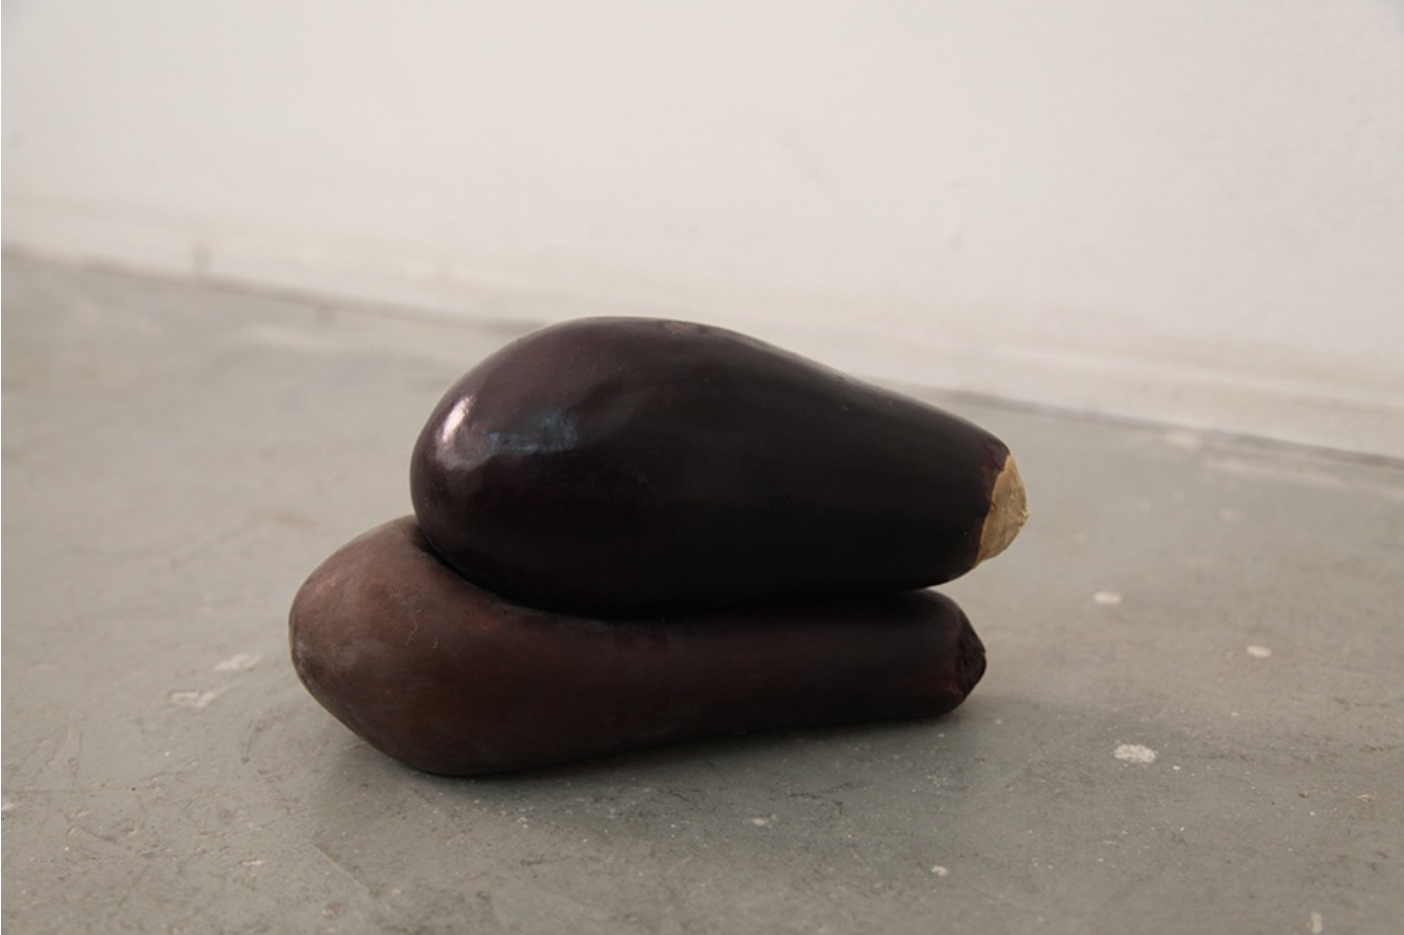 variations on the hydration and dehydration of the aubergines